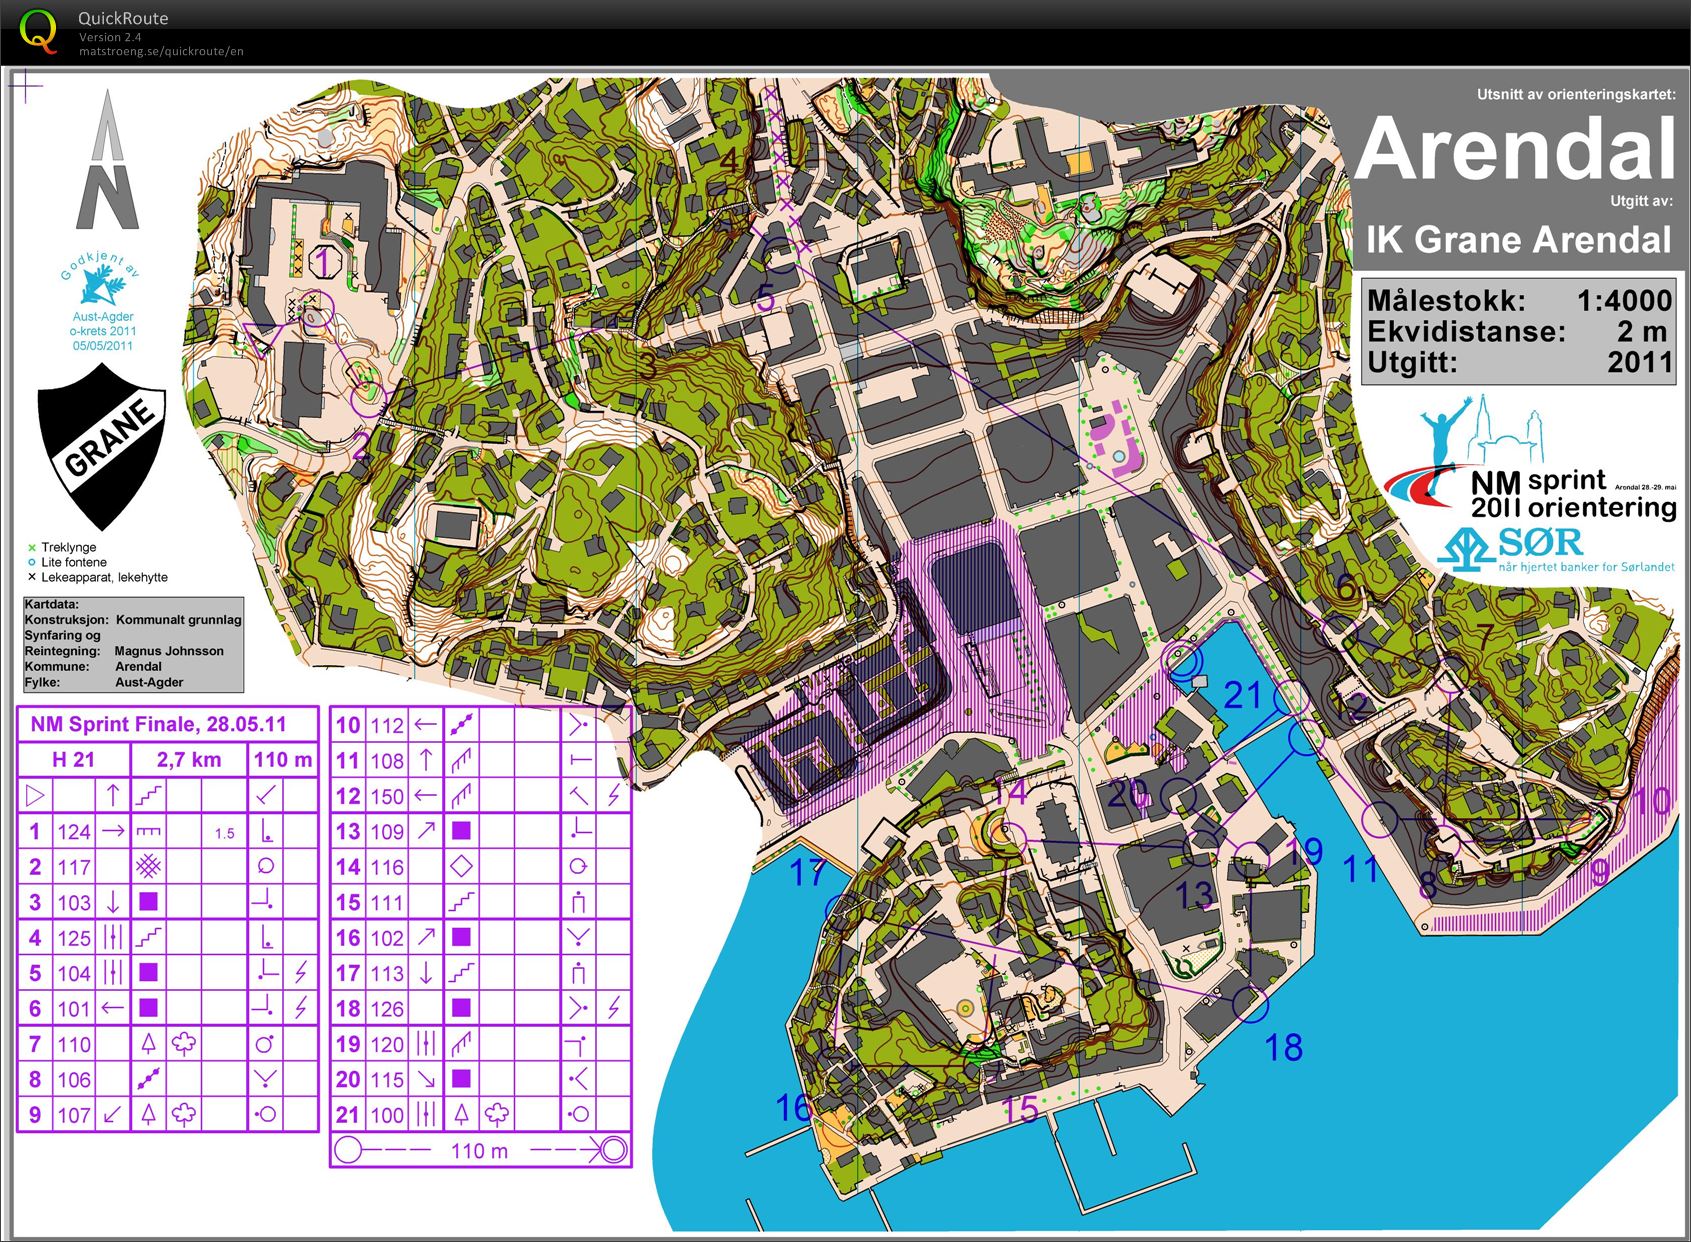 NM Sprint Arendal H21 course (09/07/2013)